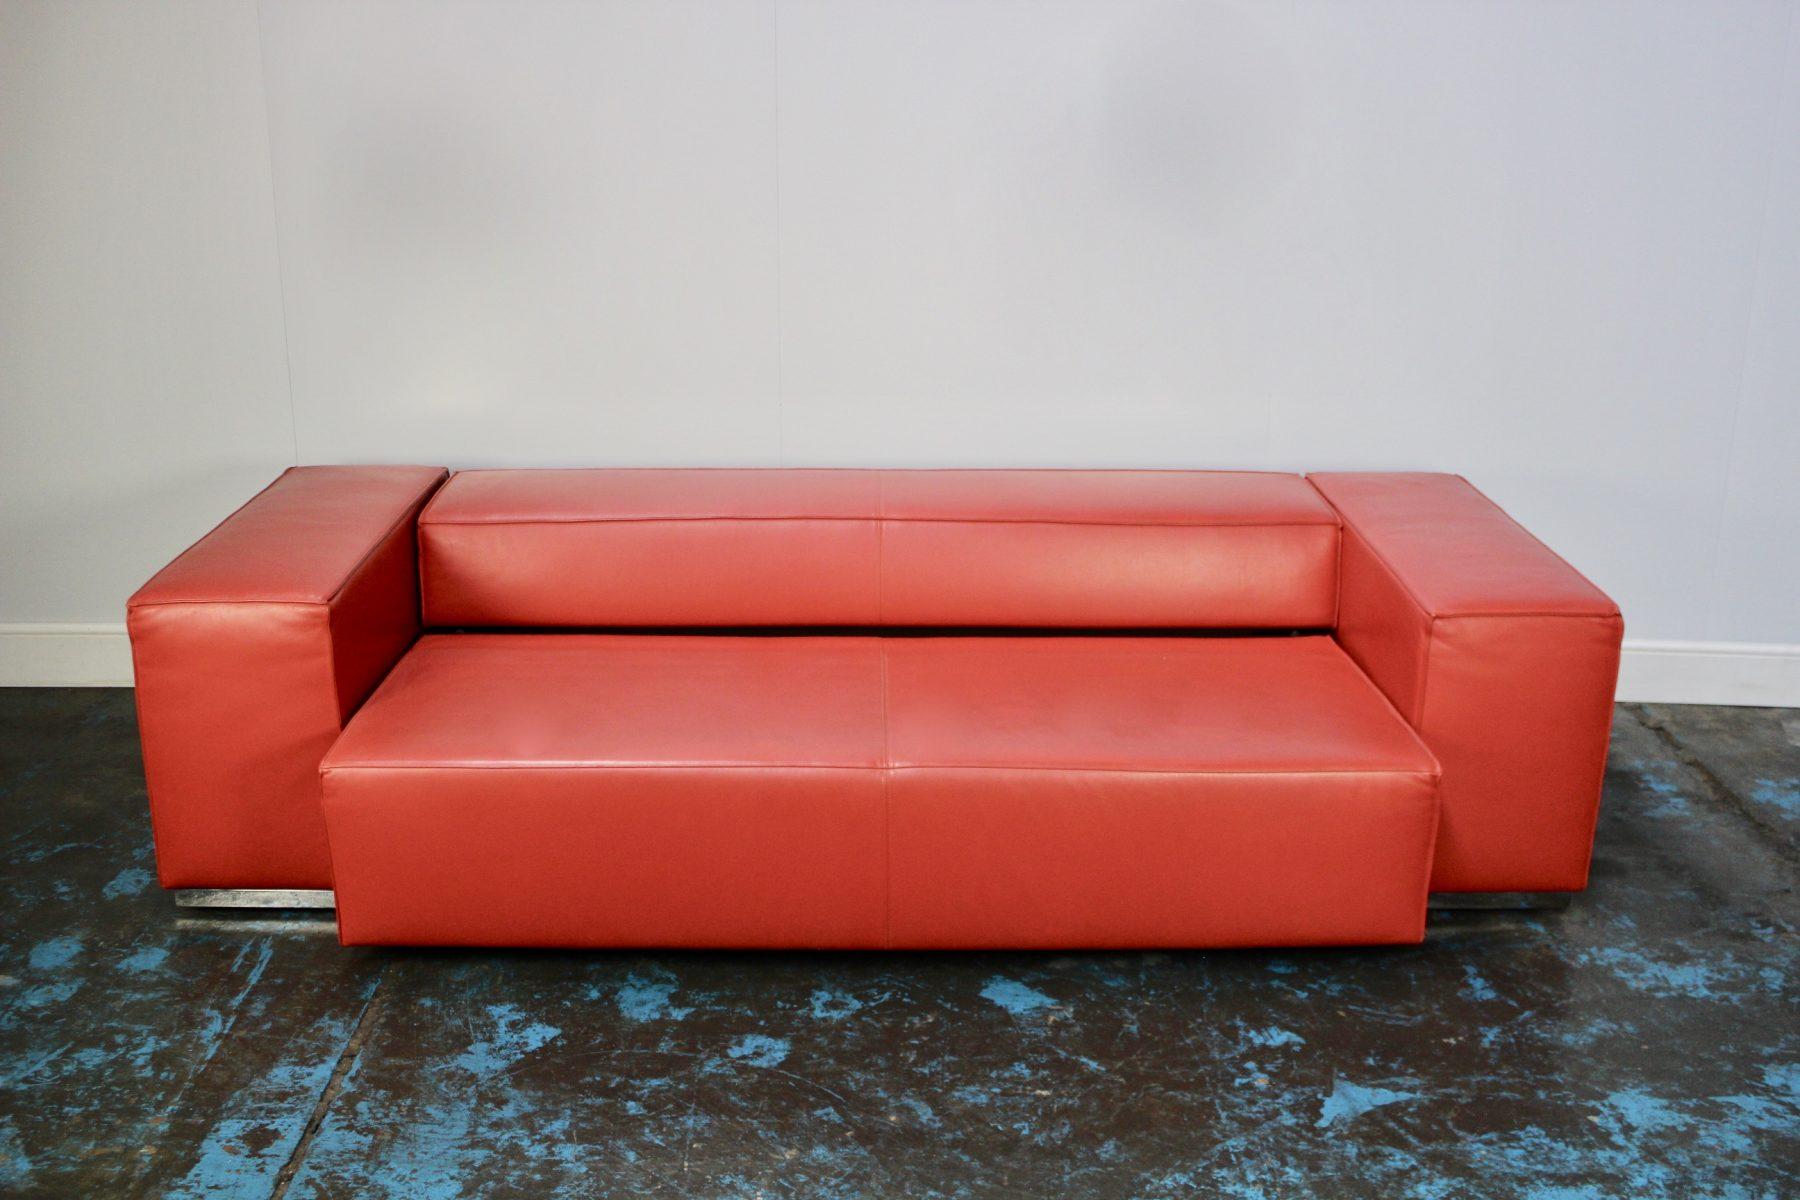 Cassina “Big Blox” 3-Seat Sofa Bed in Deep Red Leather 2